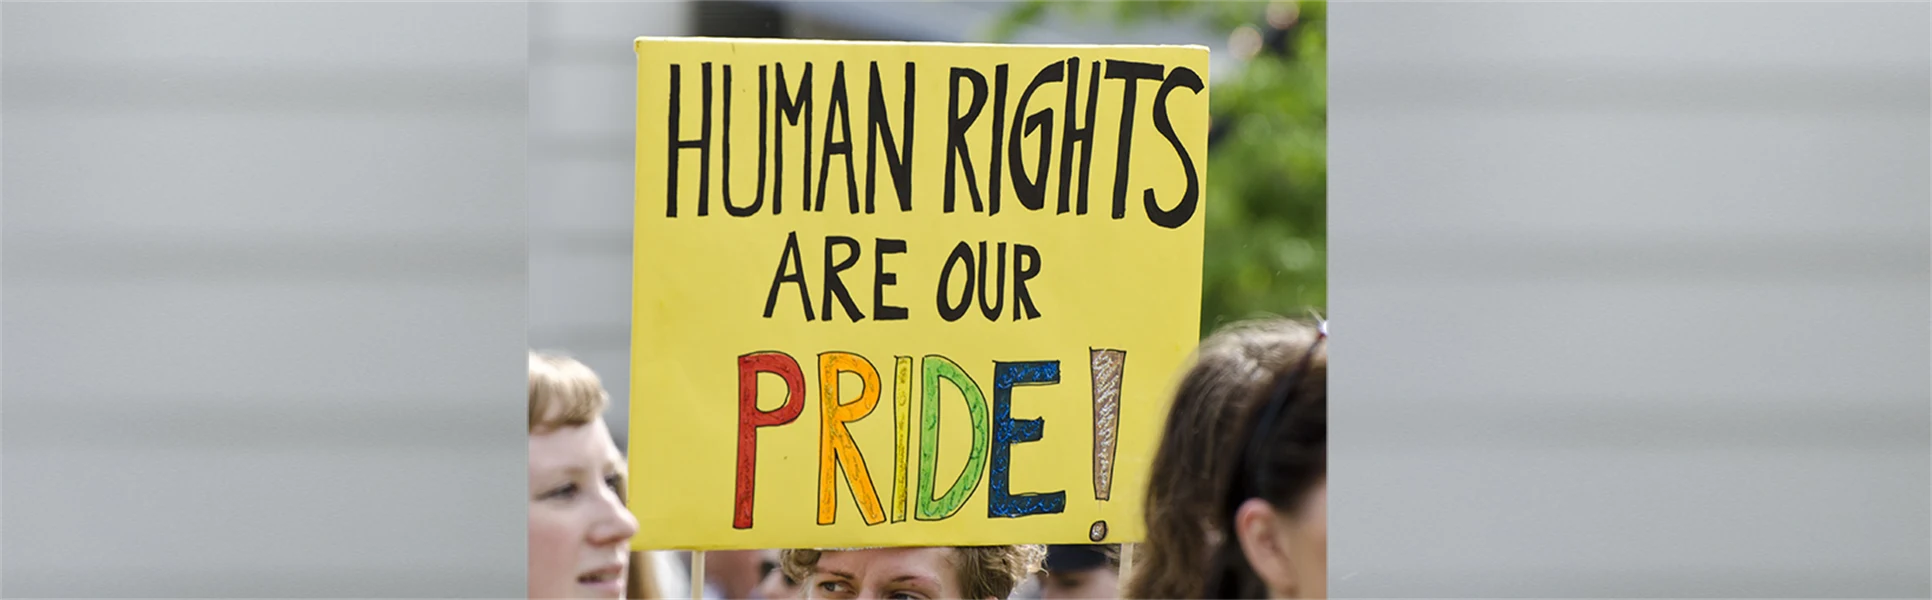 Placard in pride parade with the text "Human rights are our pride".